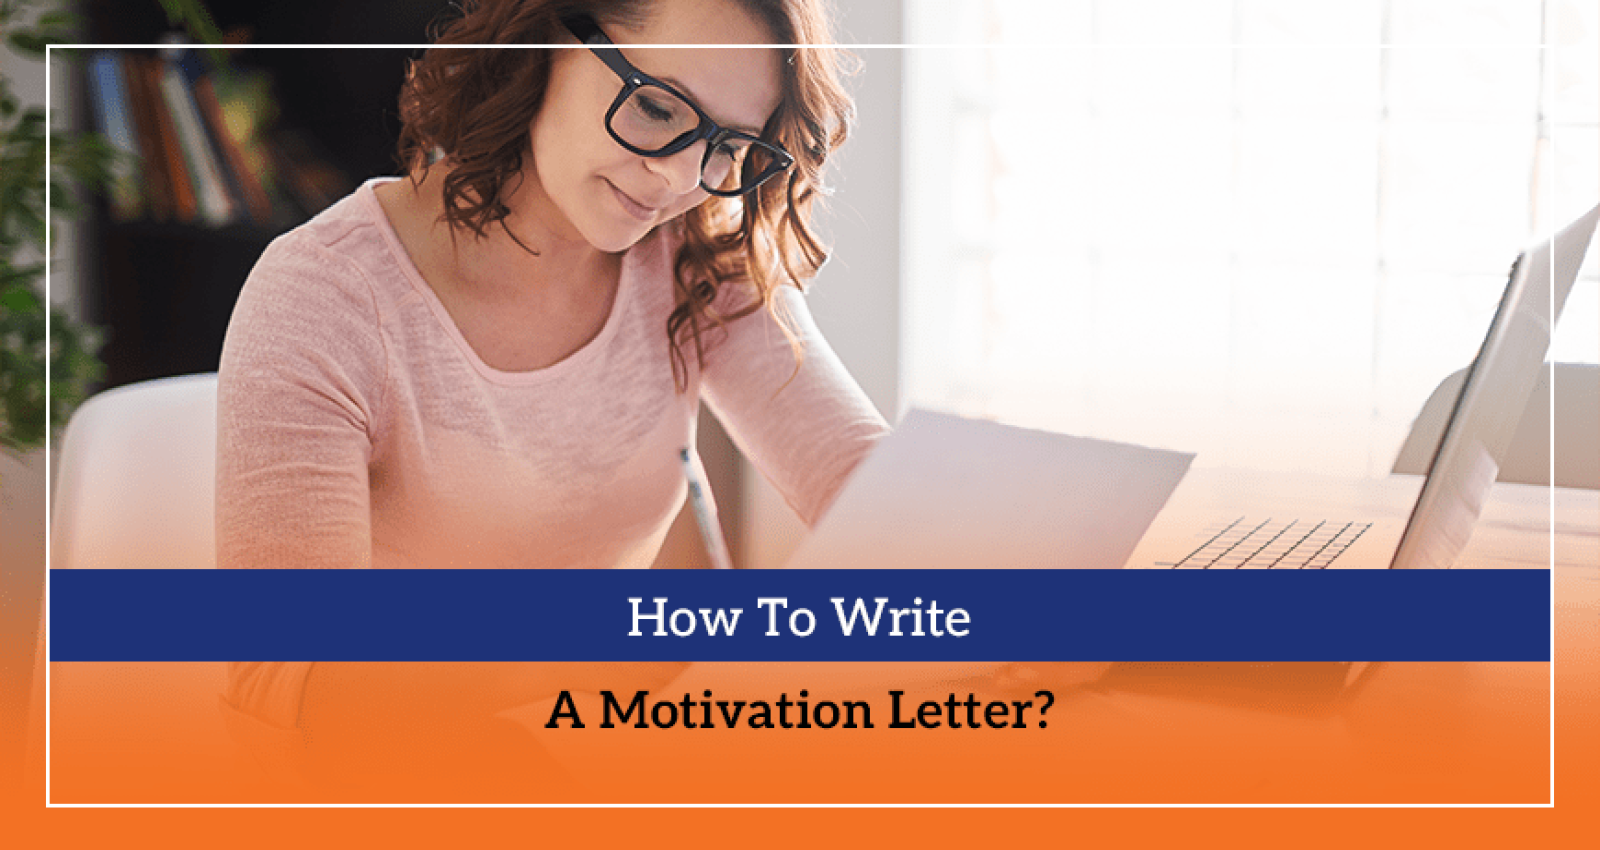 How To Write A Motivation Letter